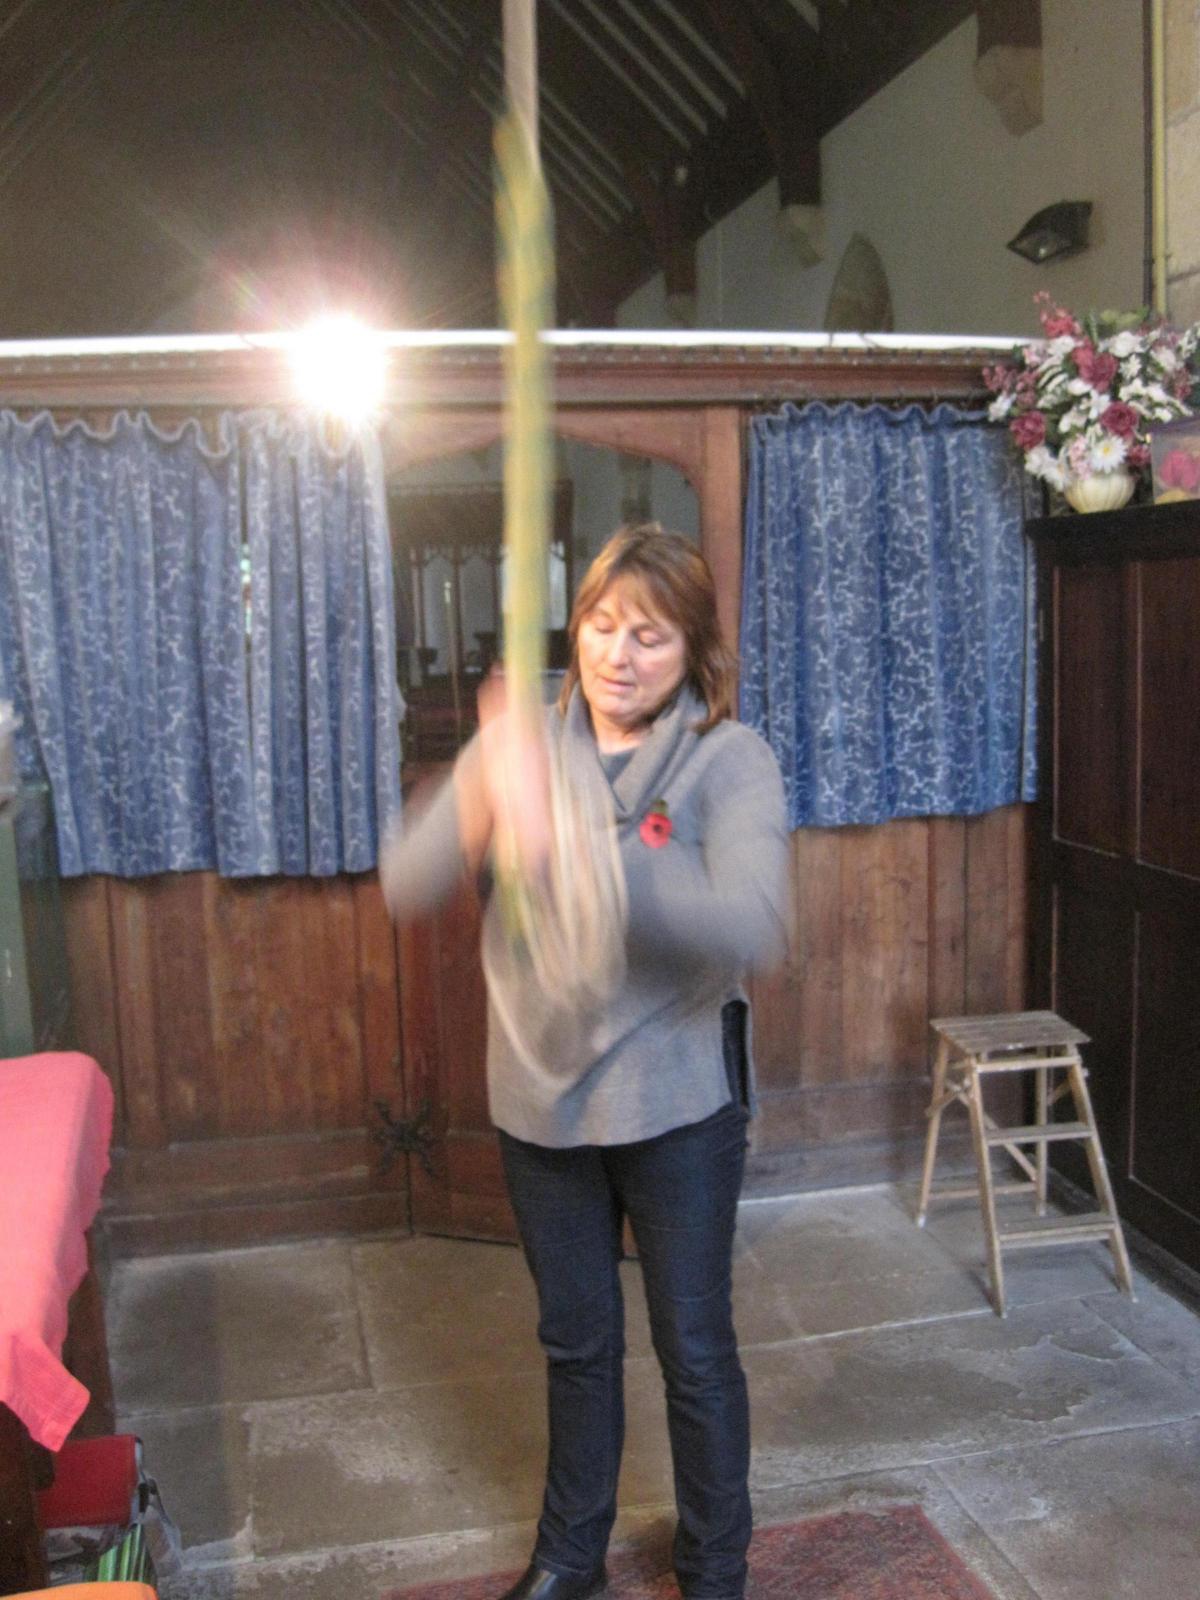 Ringing for peace at St, John's in Allerston